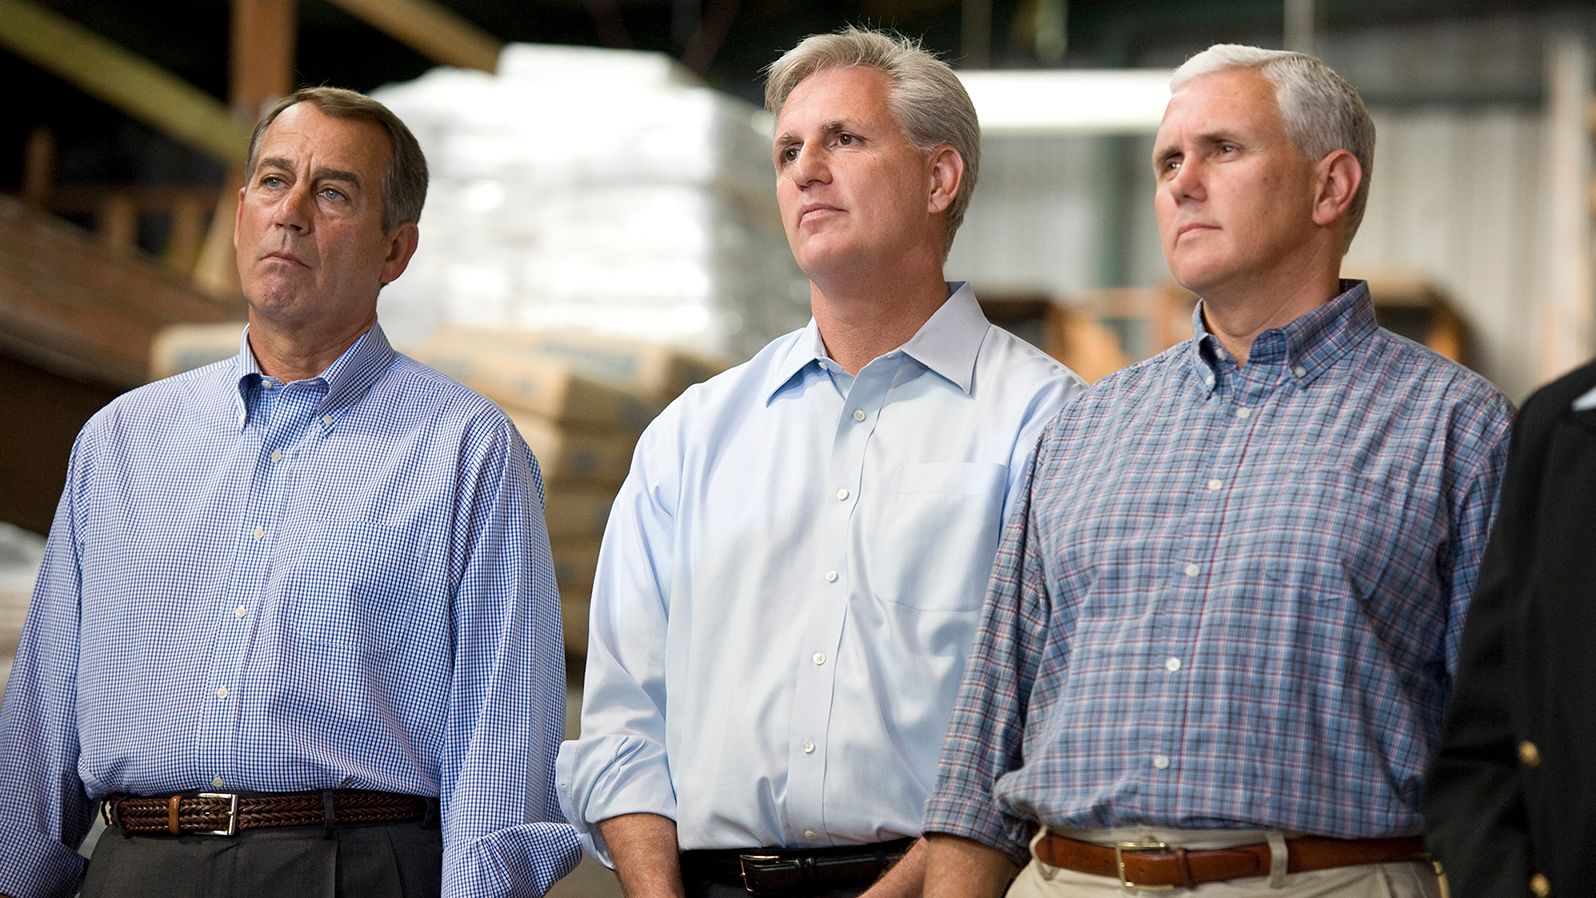 McCarthy, center, attends a news conference in 2010 with House Minority Leader John Boehner, left, and Republican Conference Chairman (and future vice president) Mike Pence. They were unveiling "A Pledge to America," a governing agenda devised by House Republicans for the 111th Congress. McCarthy at the time was the GOP's chief deputy whip.